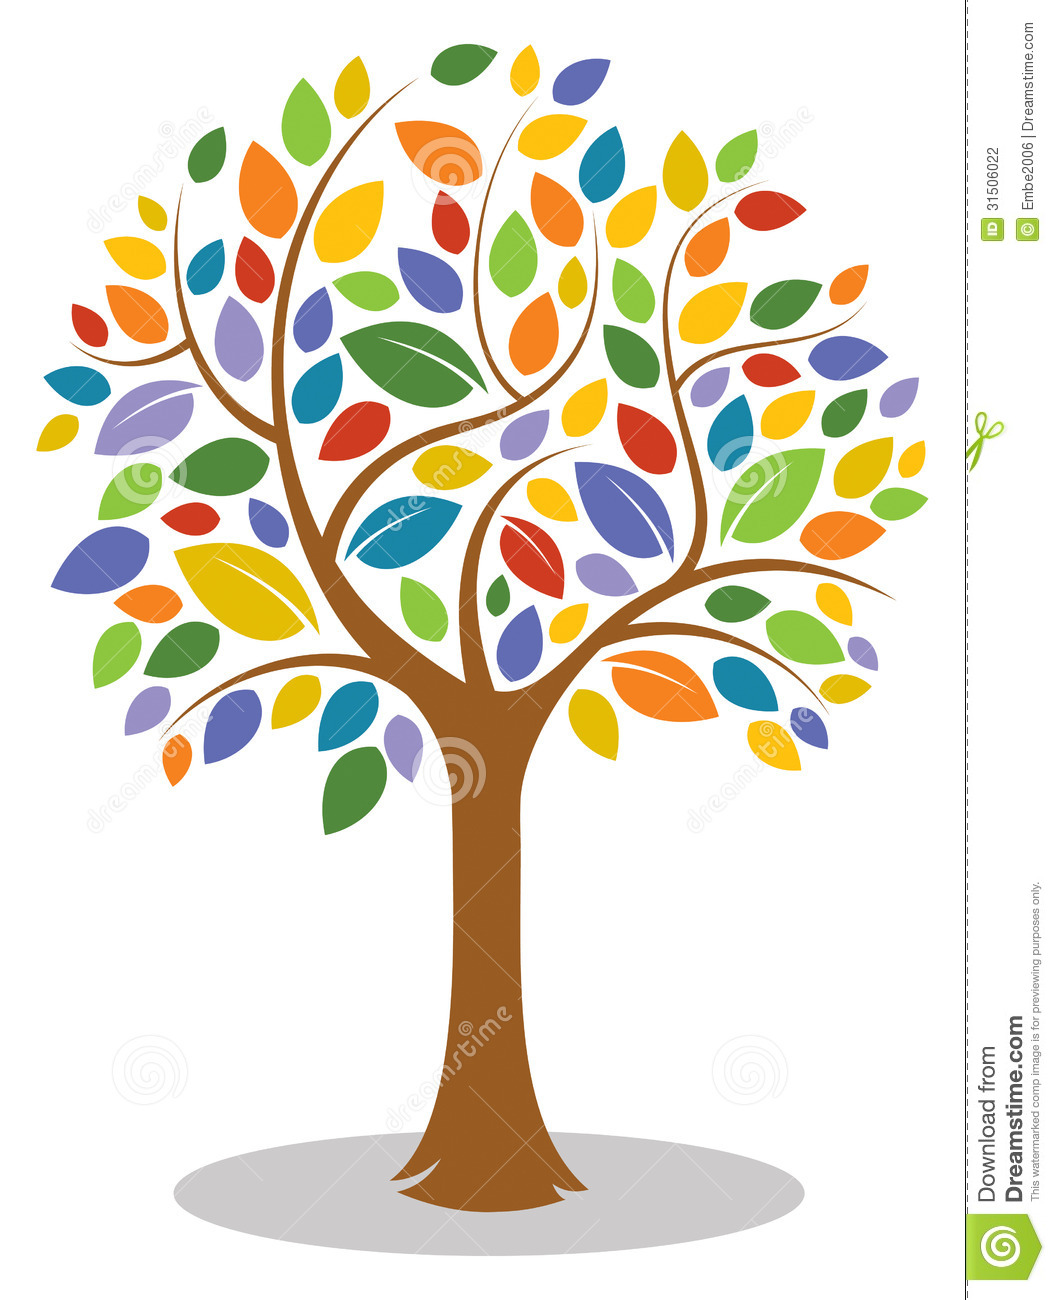 Colorful Family Tree Background   Clipart Panda   Free Clipart Images